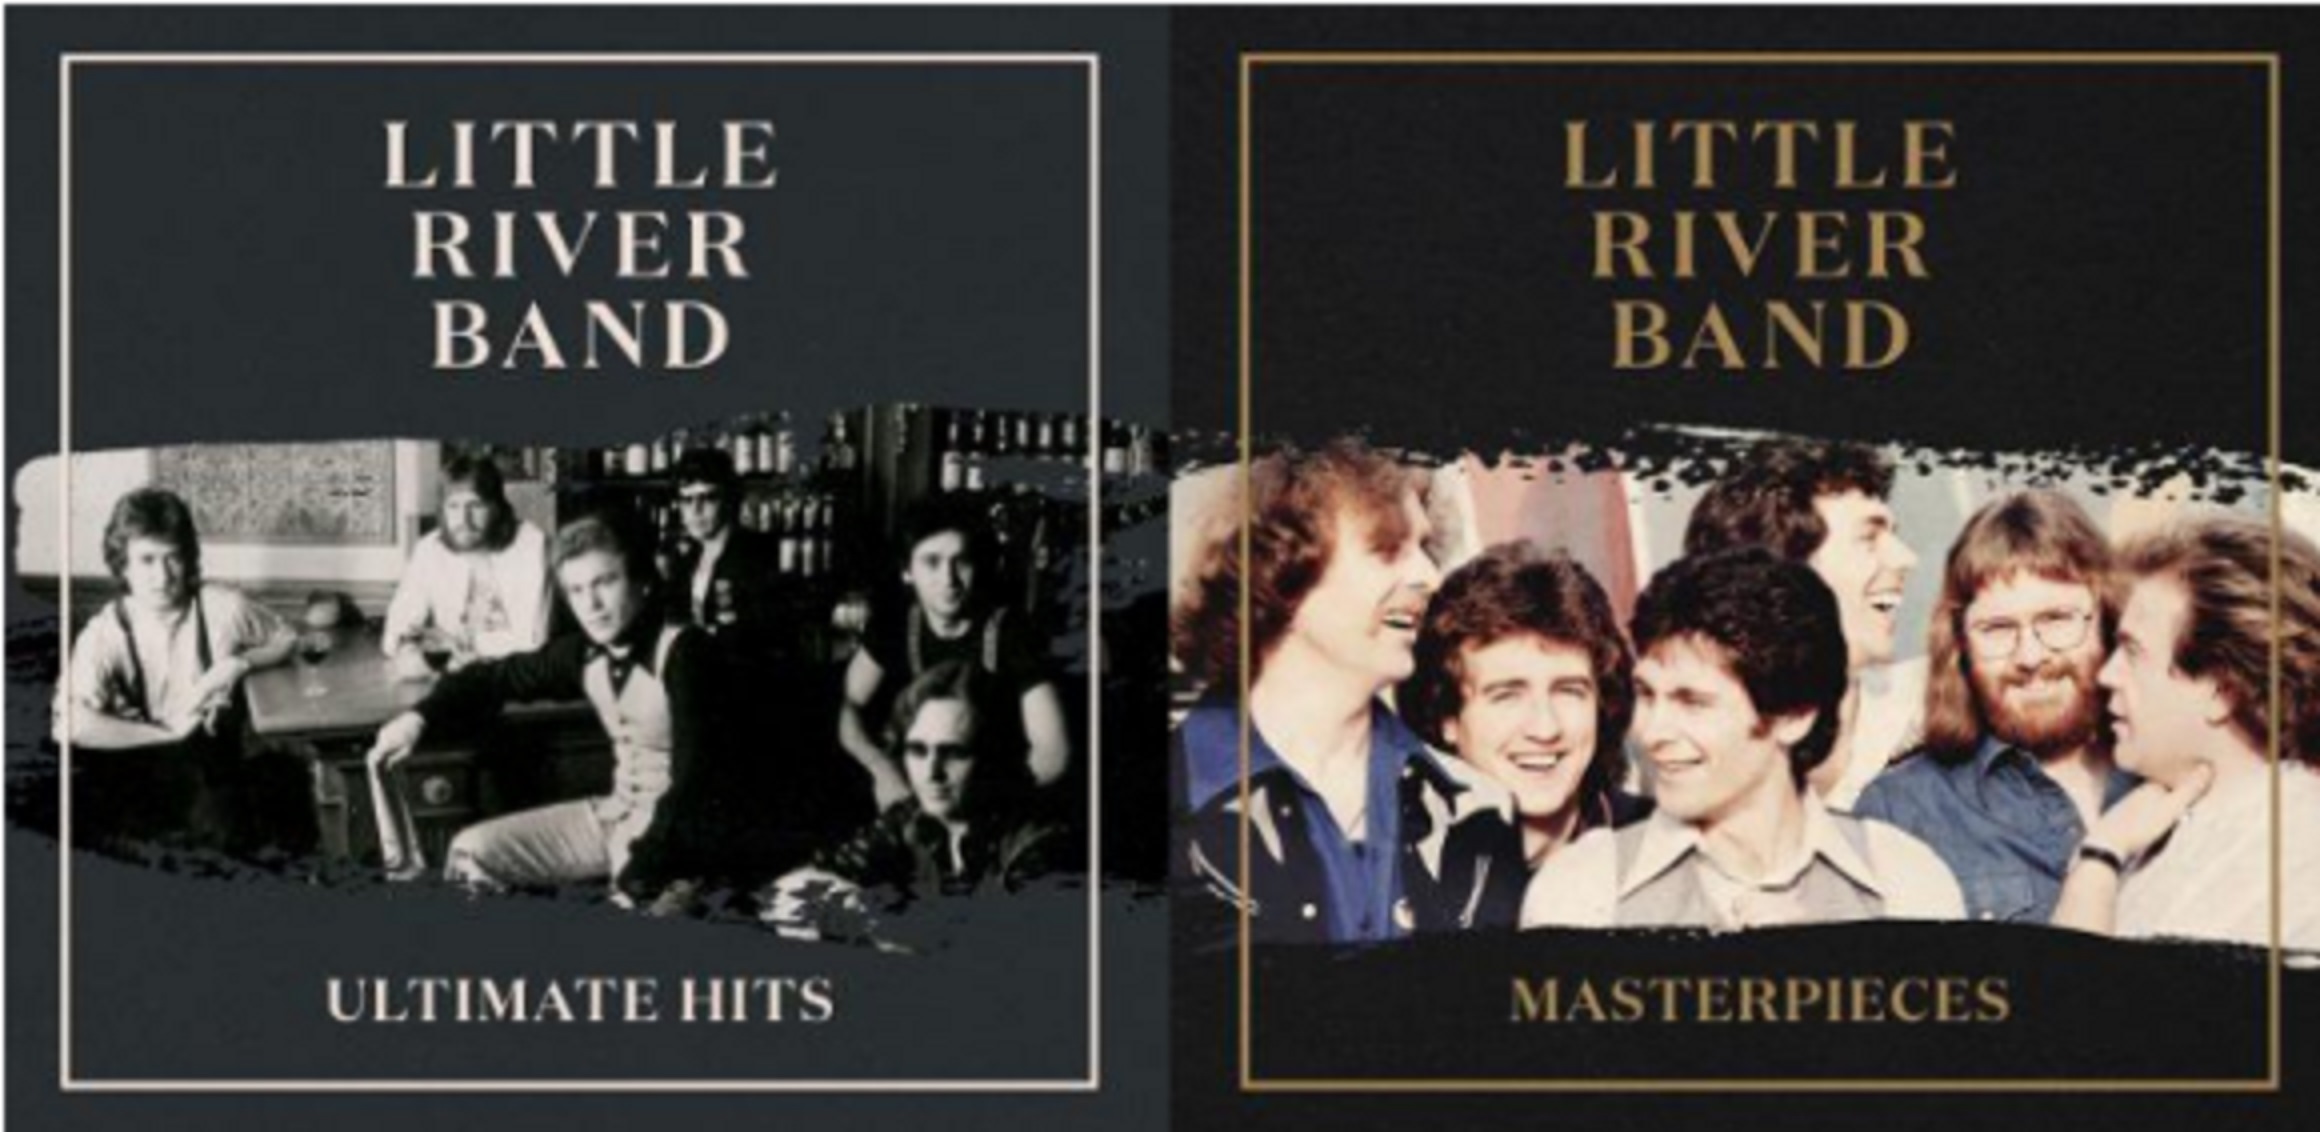 LITTLE RIVER BAND Announces Definitive Compilations Ultimate Hits and Masterpieces